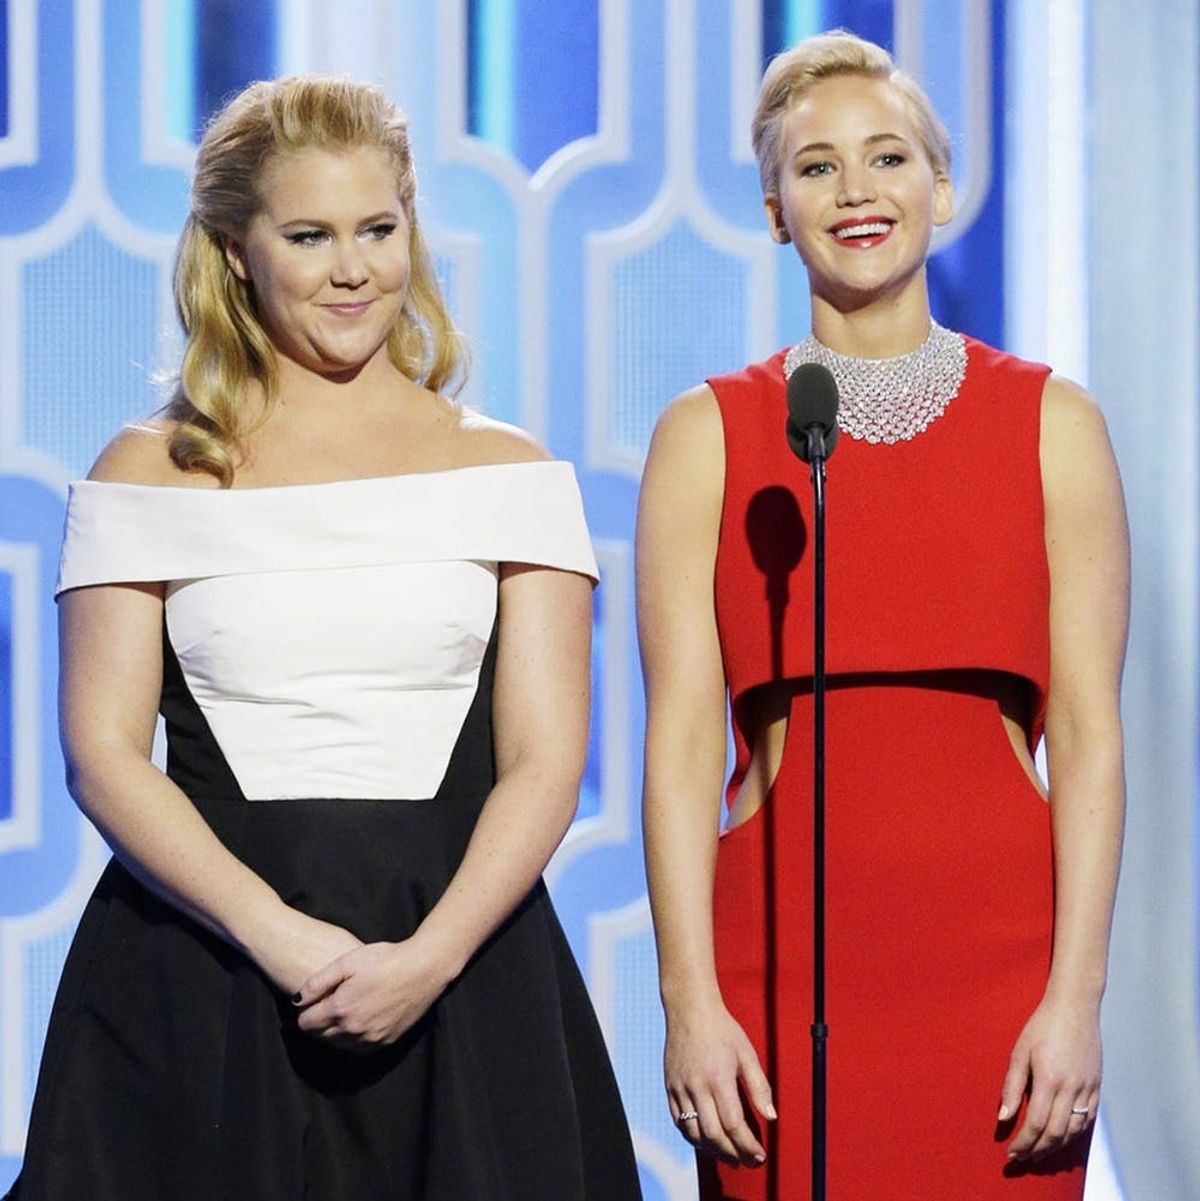 Amy Schumer and Jennifer Lawrence Might Be Making the Best Reality Show Ever